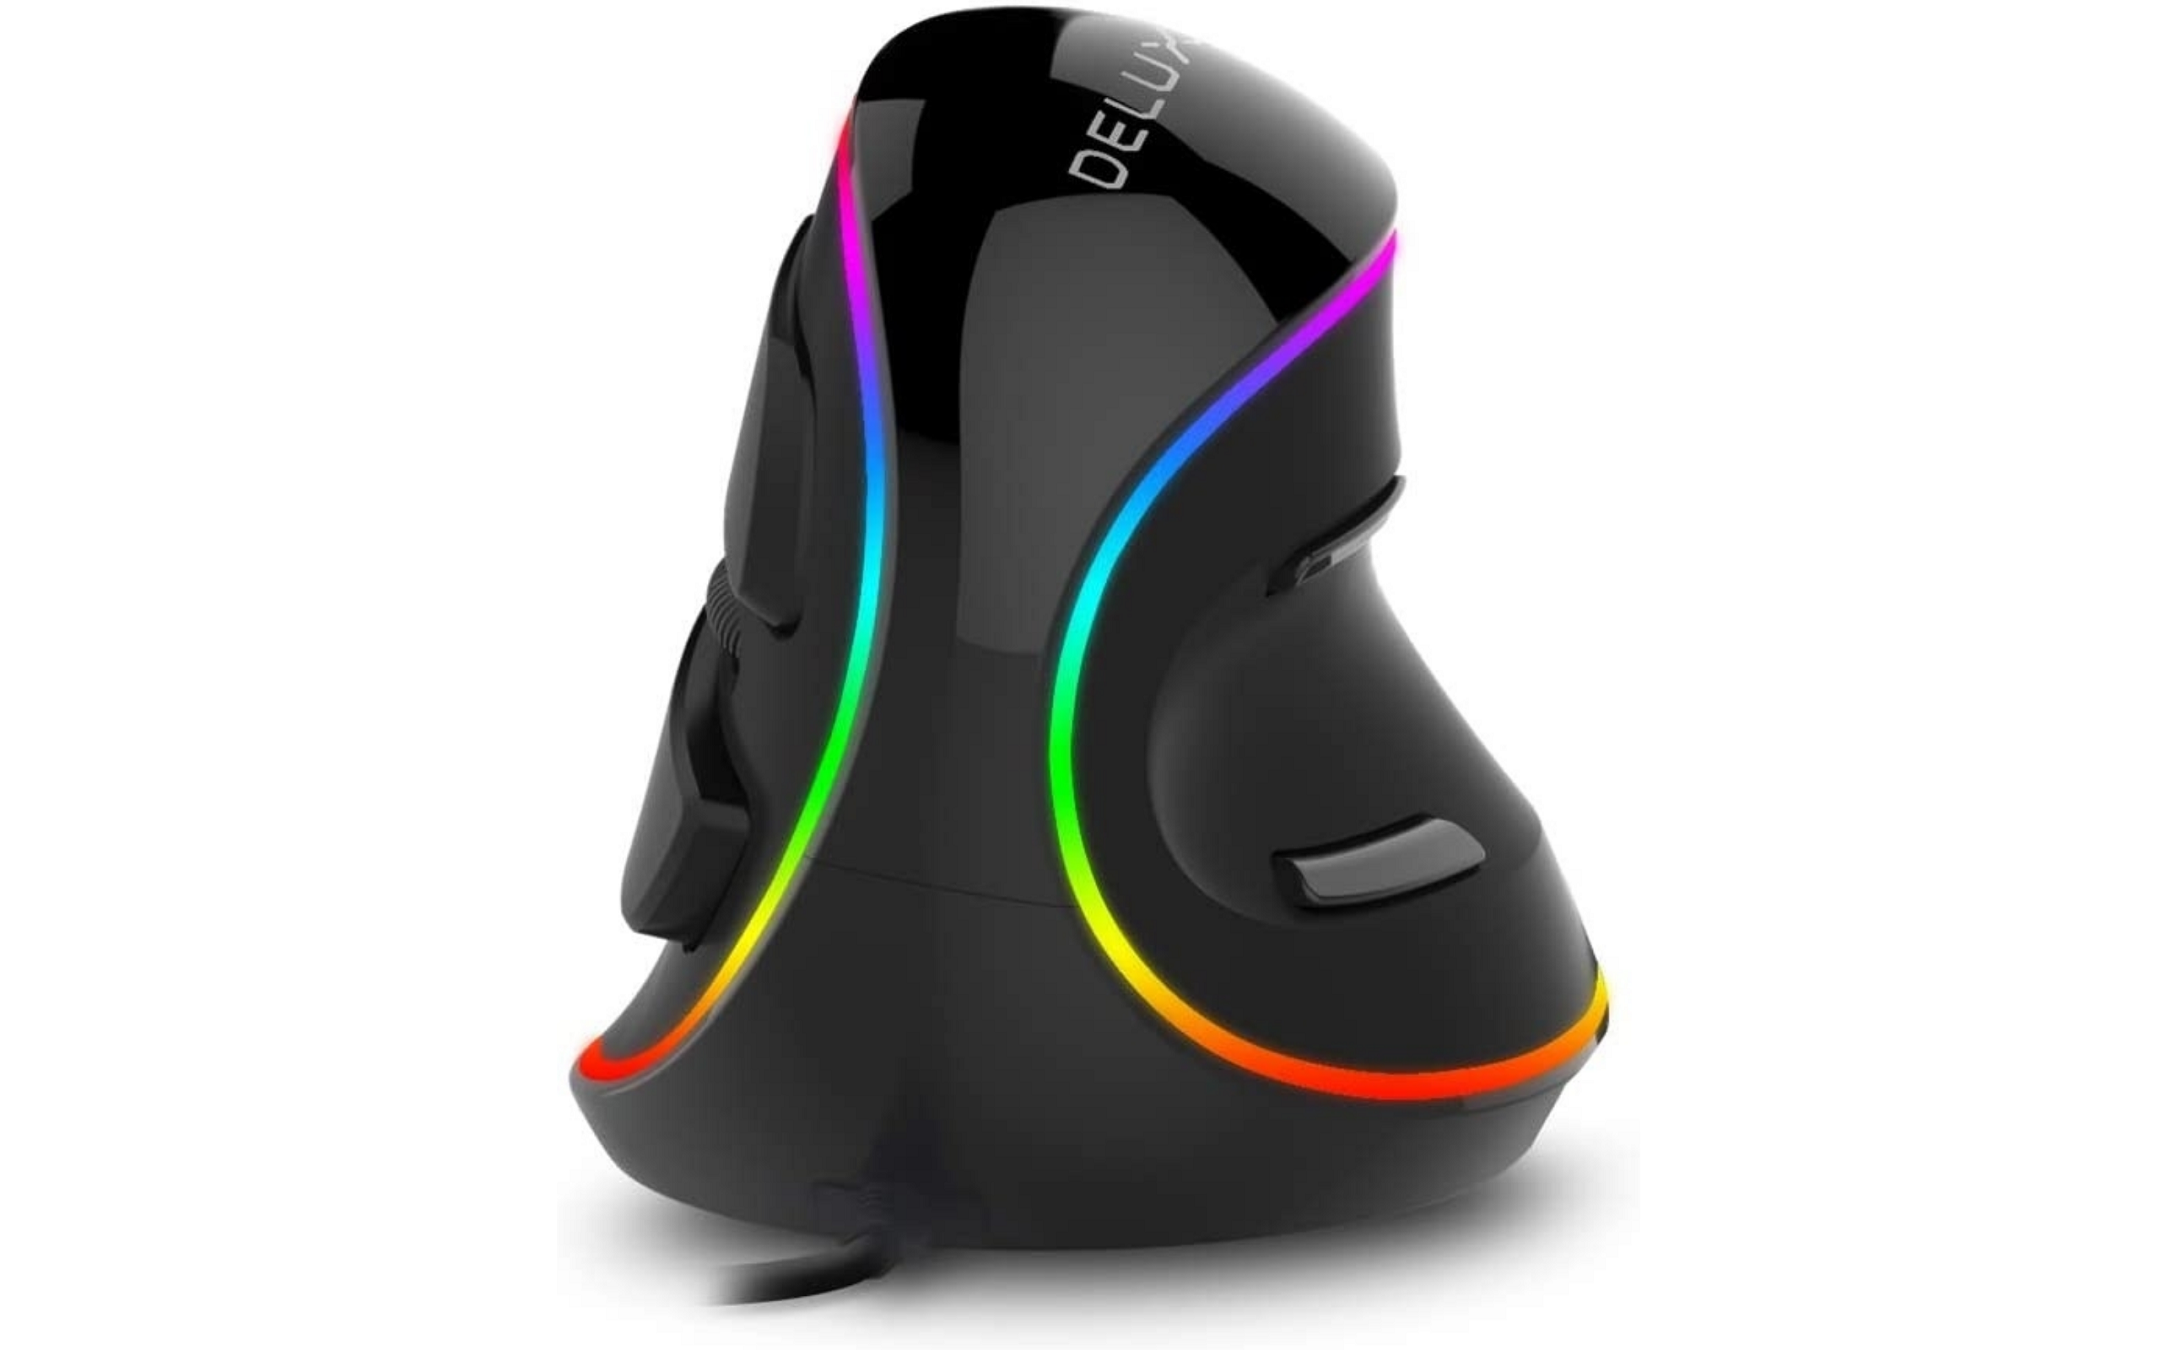 Vertical mouse with 5 DPI levels: offered on Amazon